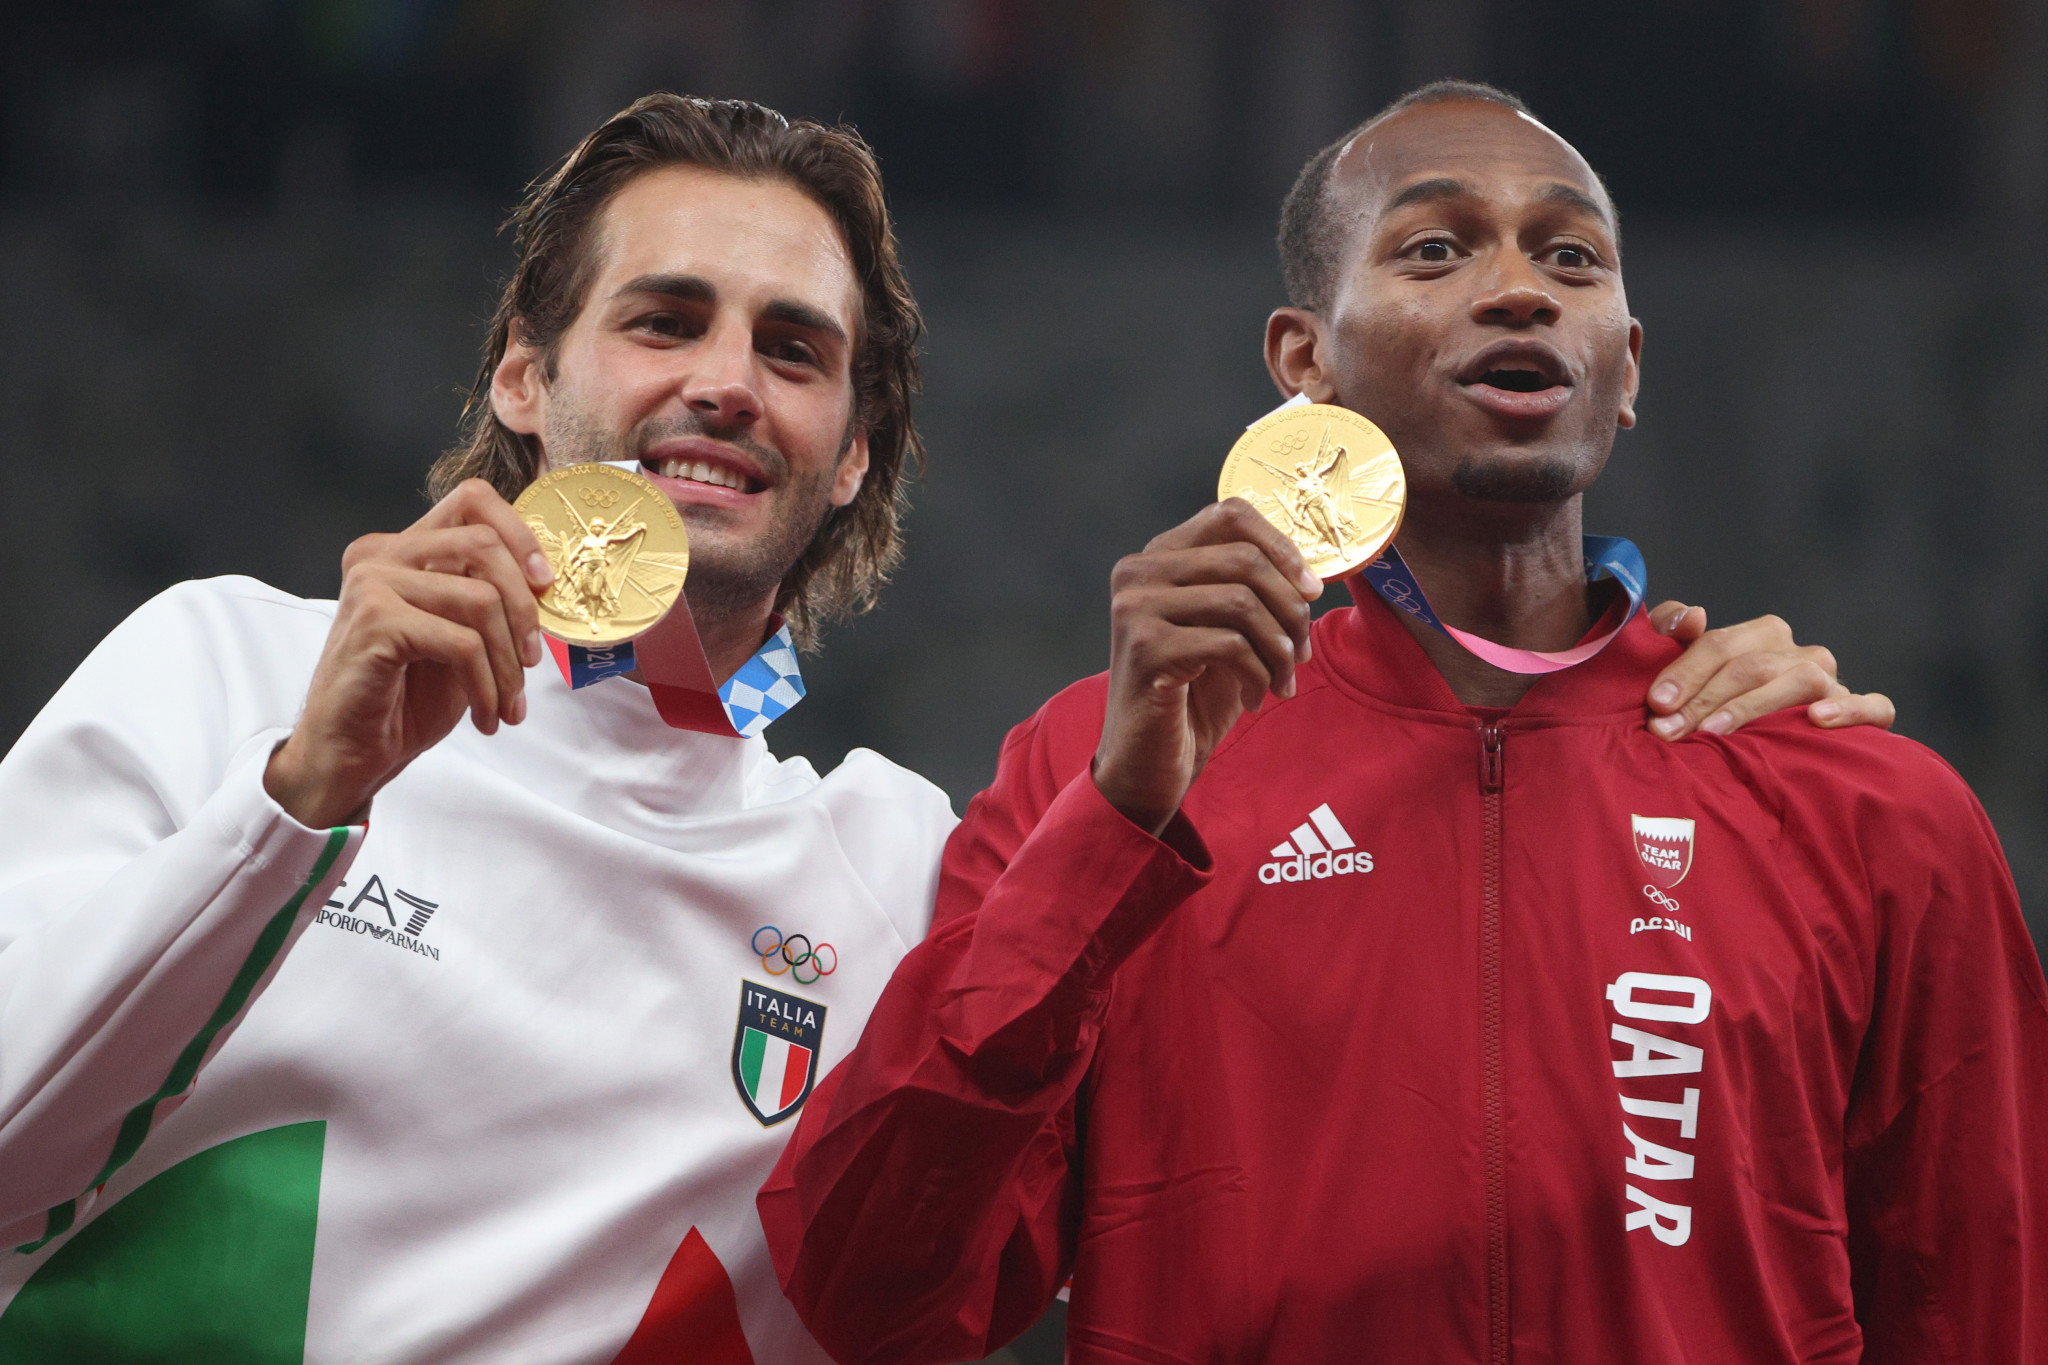 Gianmarco Tamberi, left, shared the Olympic gold medal at Tokyo 2020 with Qatar's Mutaz Barshim ©Getty Images